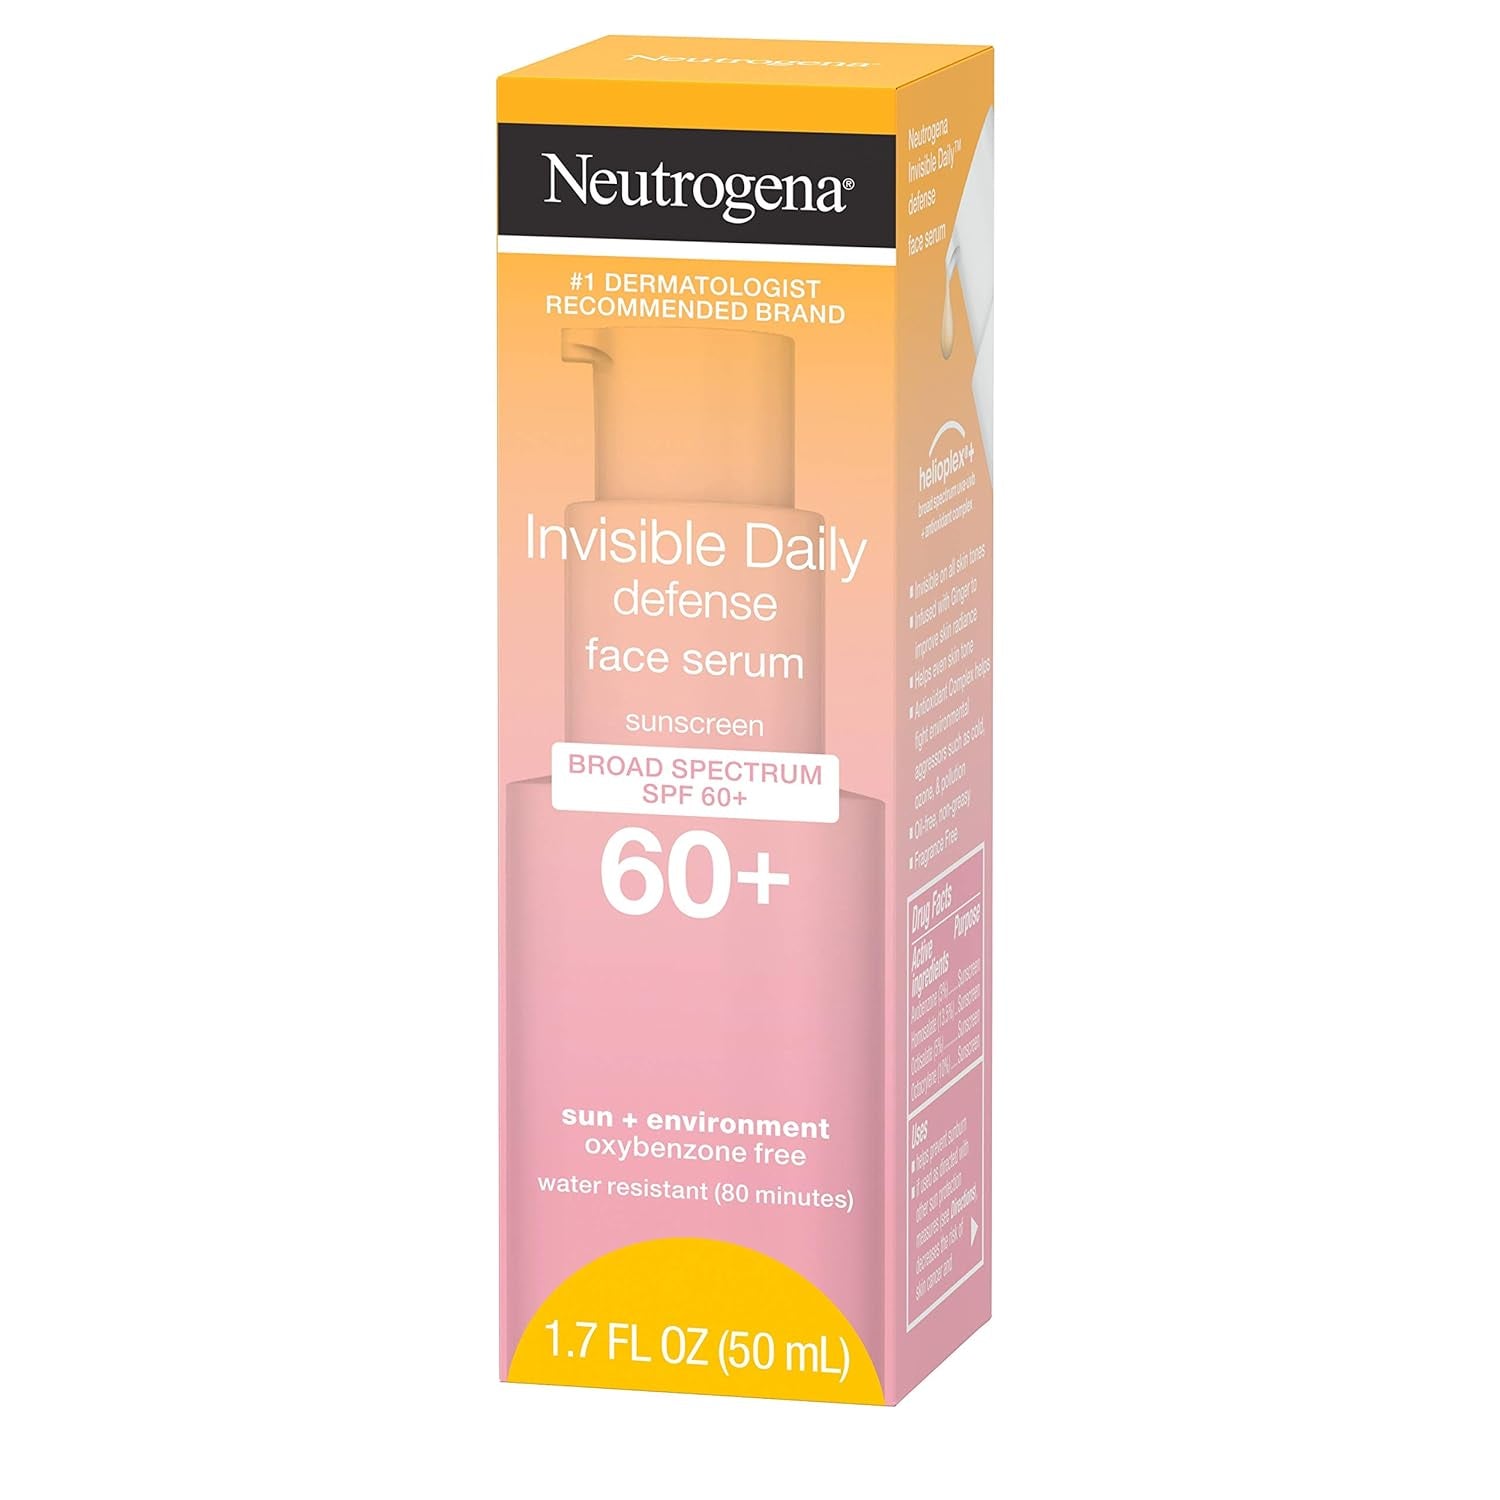 Neutrogena SPF 60+ Invisible Daily Defense Face Serum - Pack of 3